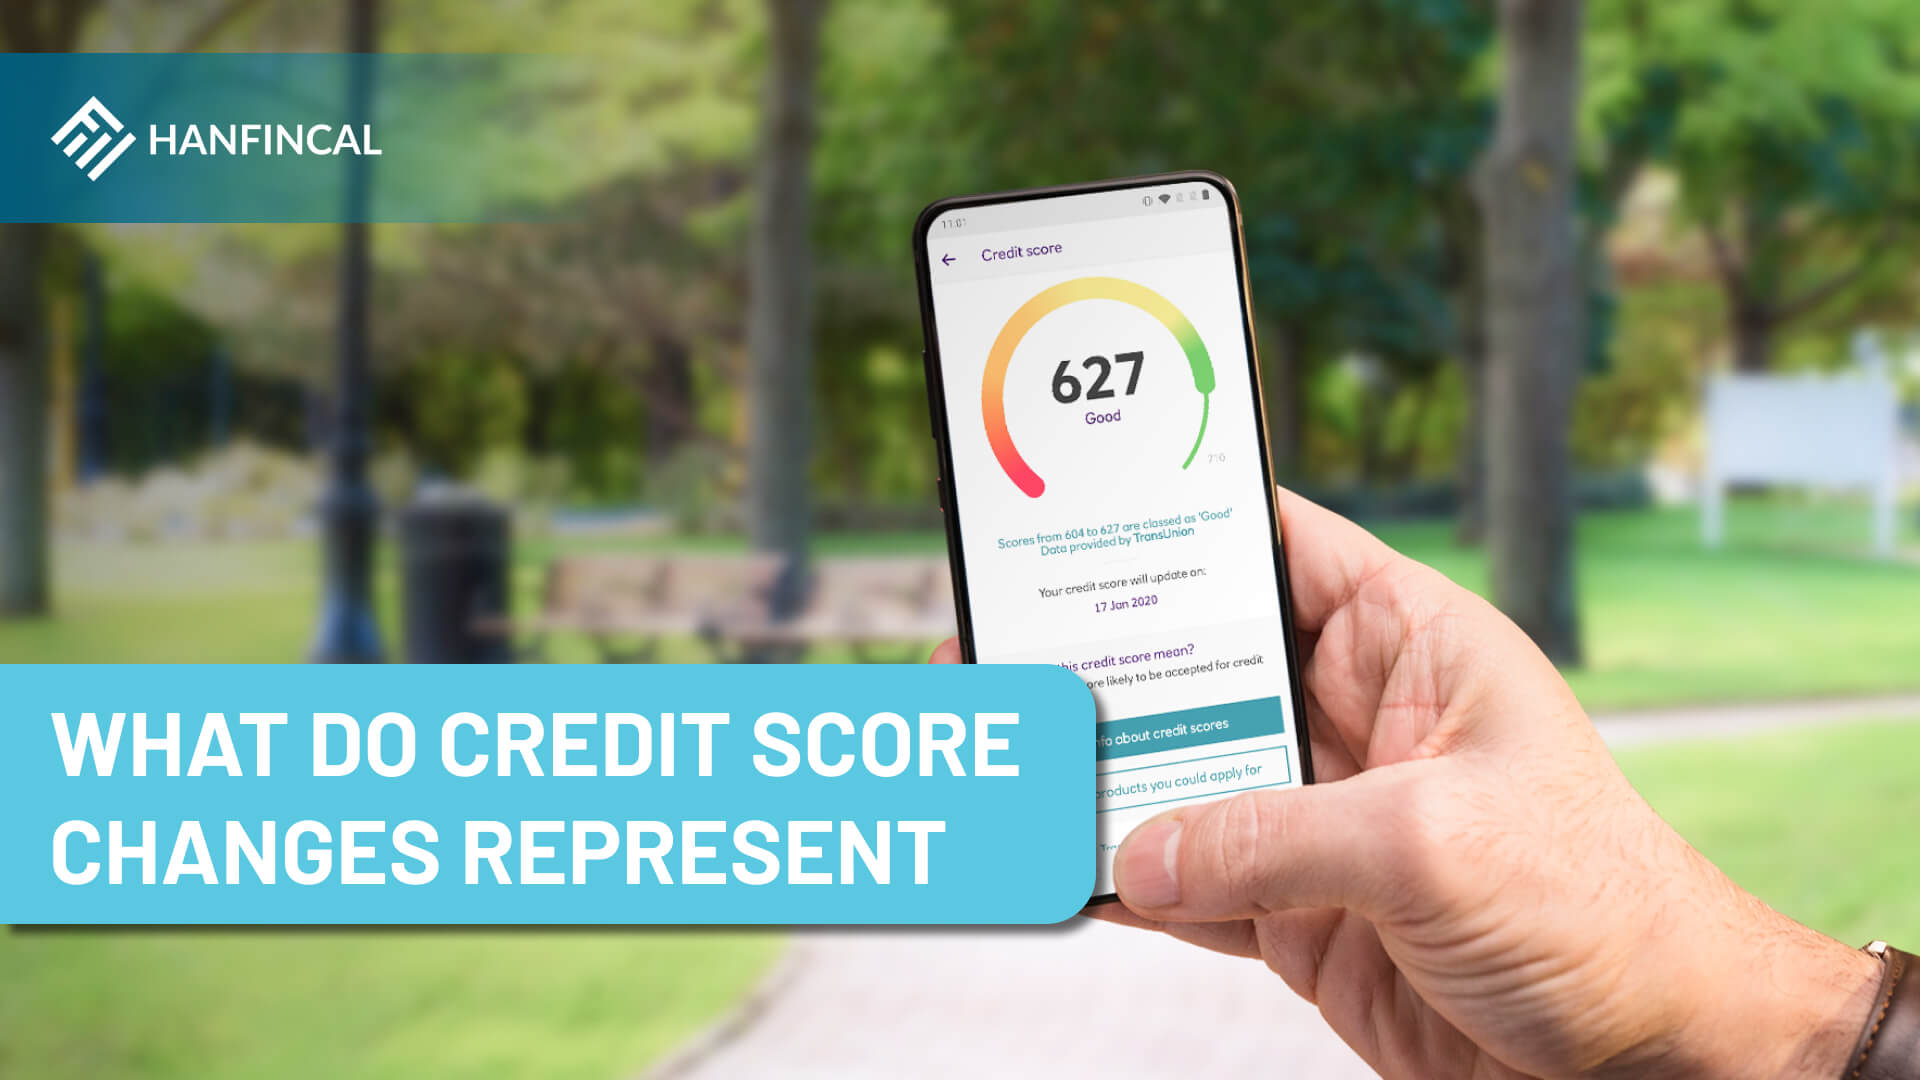 What do credit score changes represent?